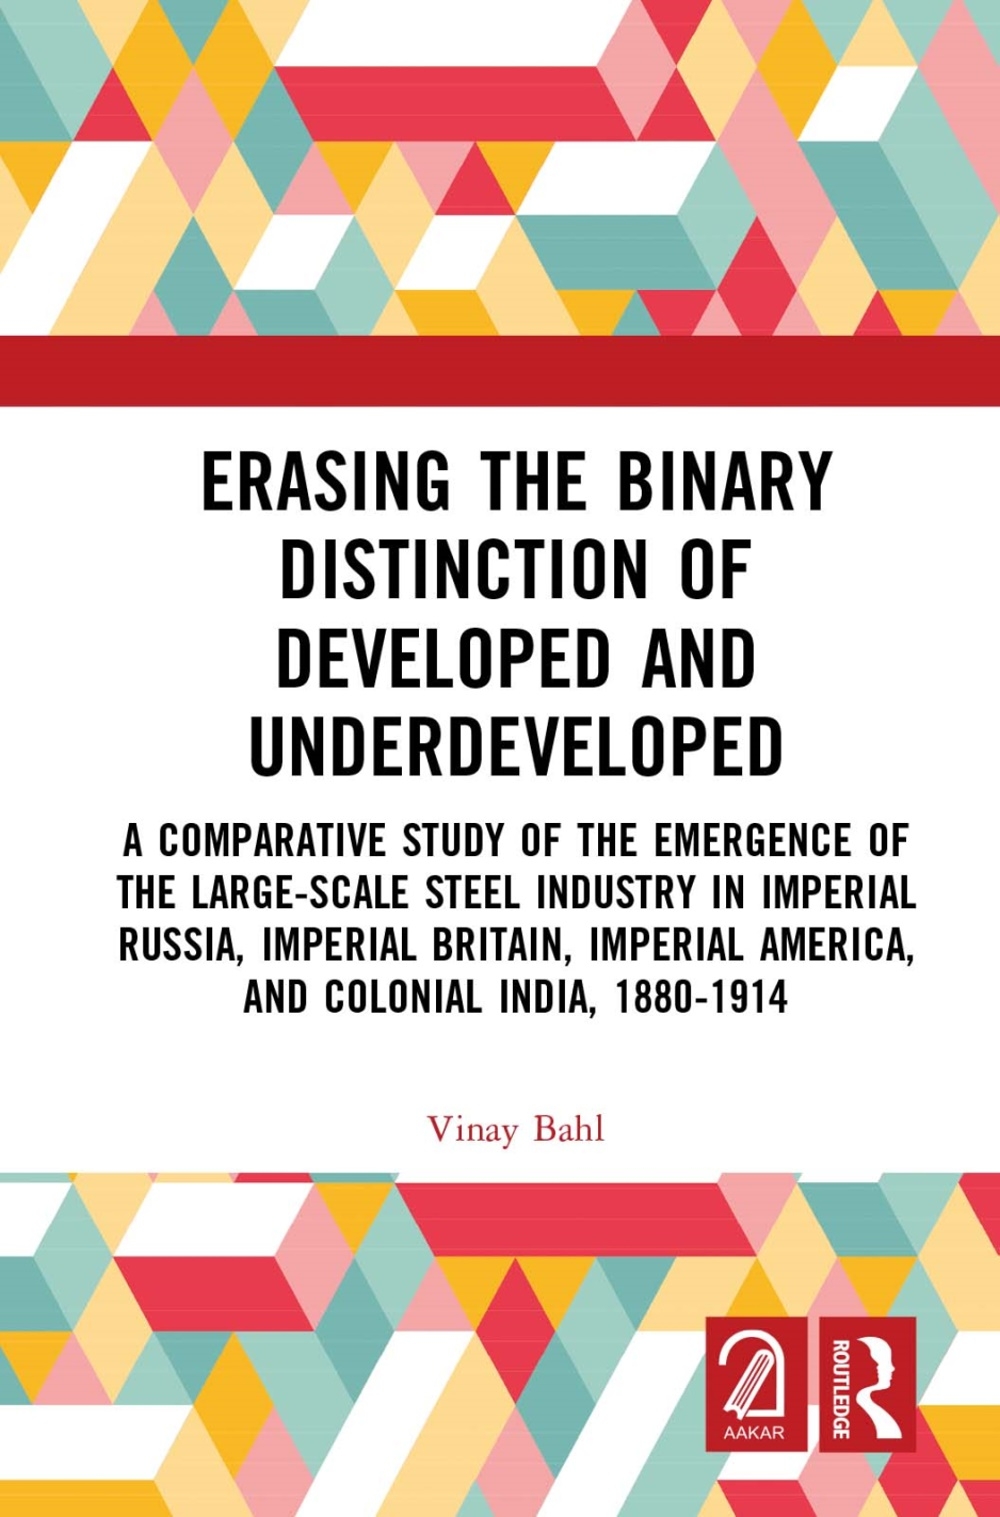 Erasing the Binary Distinction of Developed and Underdeveloped: A Comparative Study of the Emergence of the Large-Scale Steel Industry in Imperial Rus